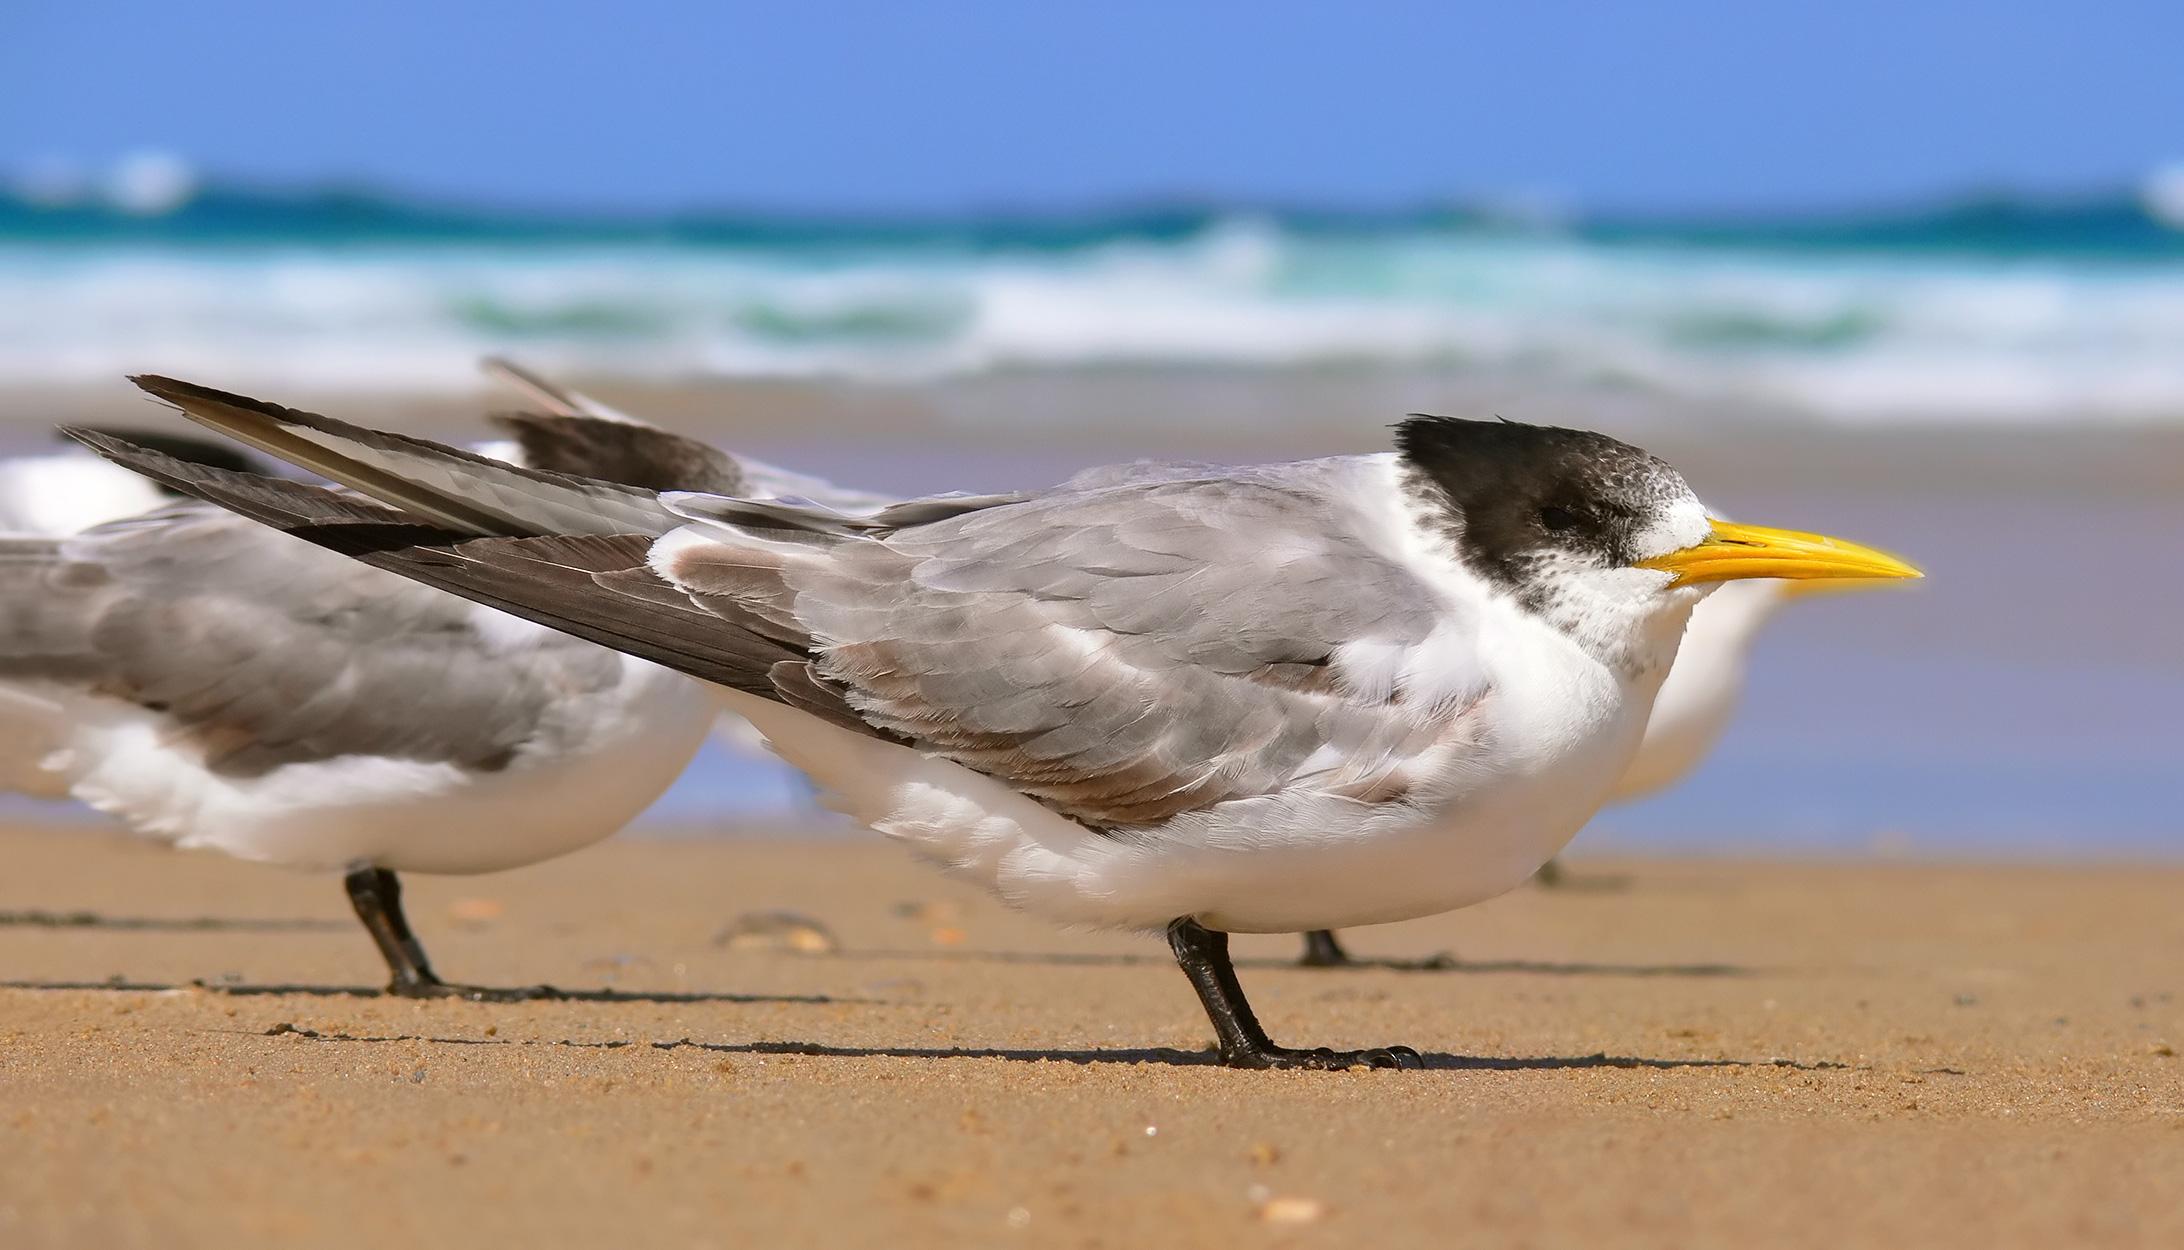 Crested tern444